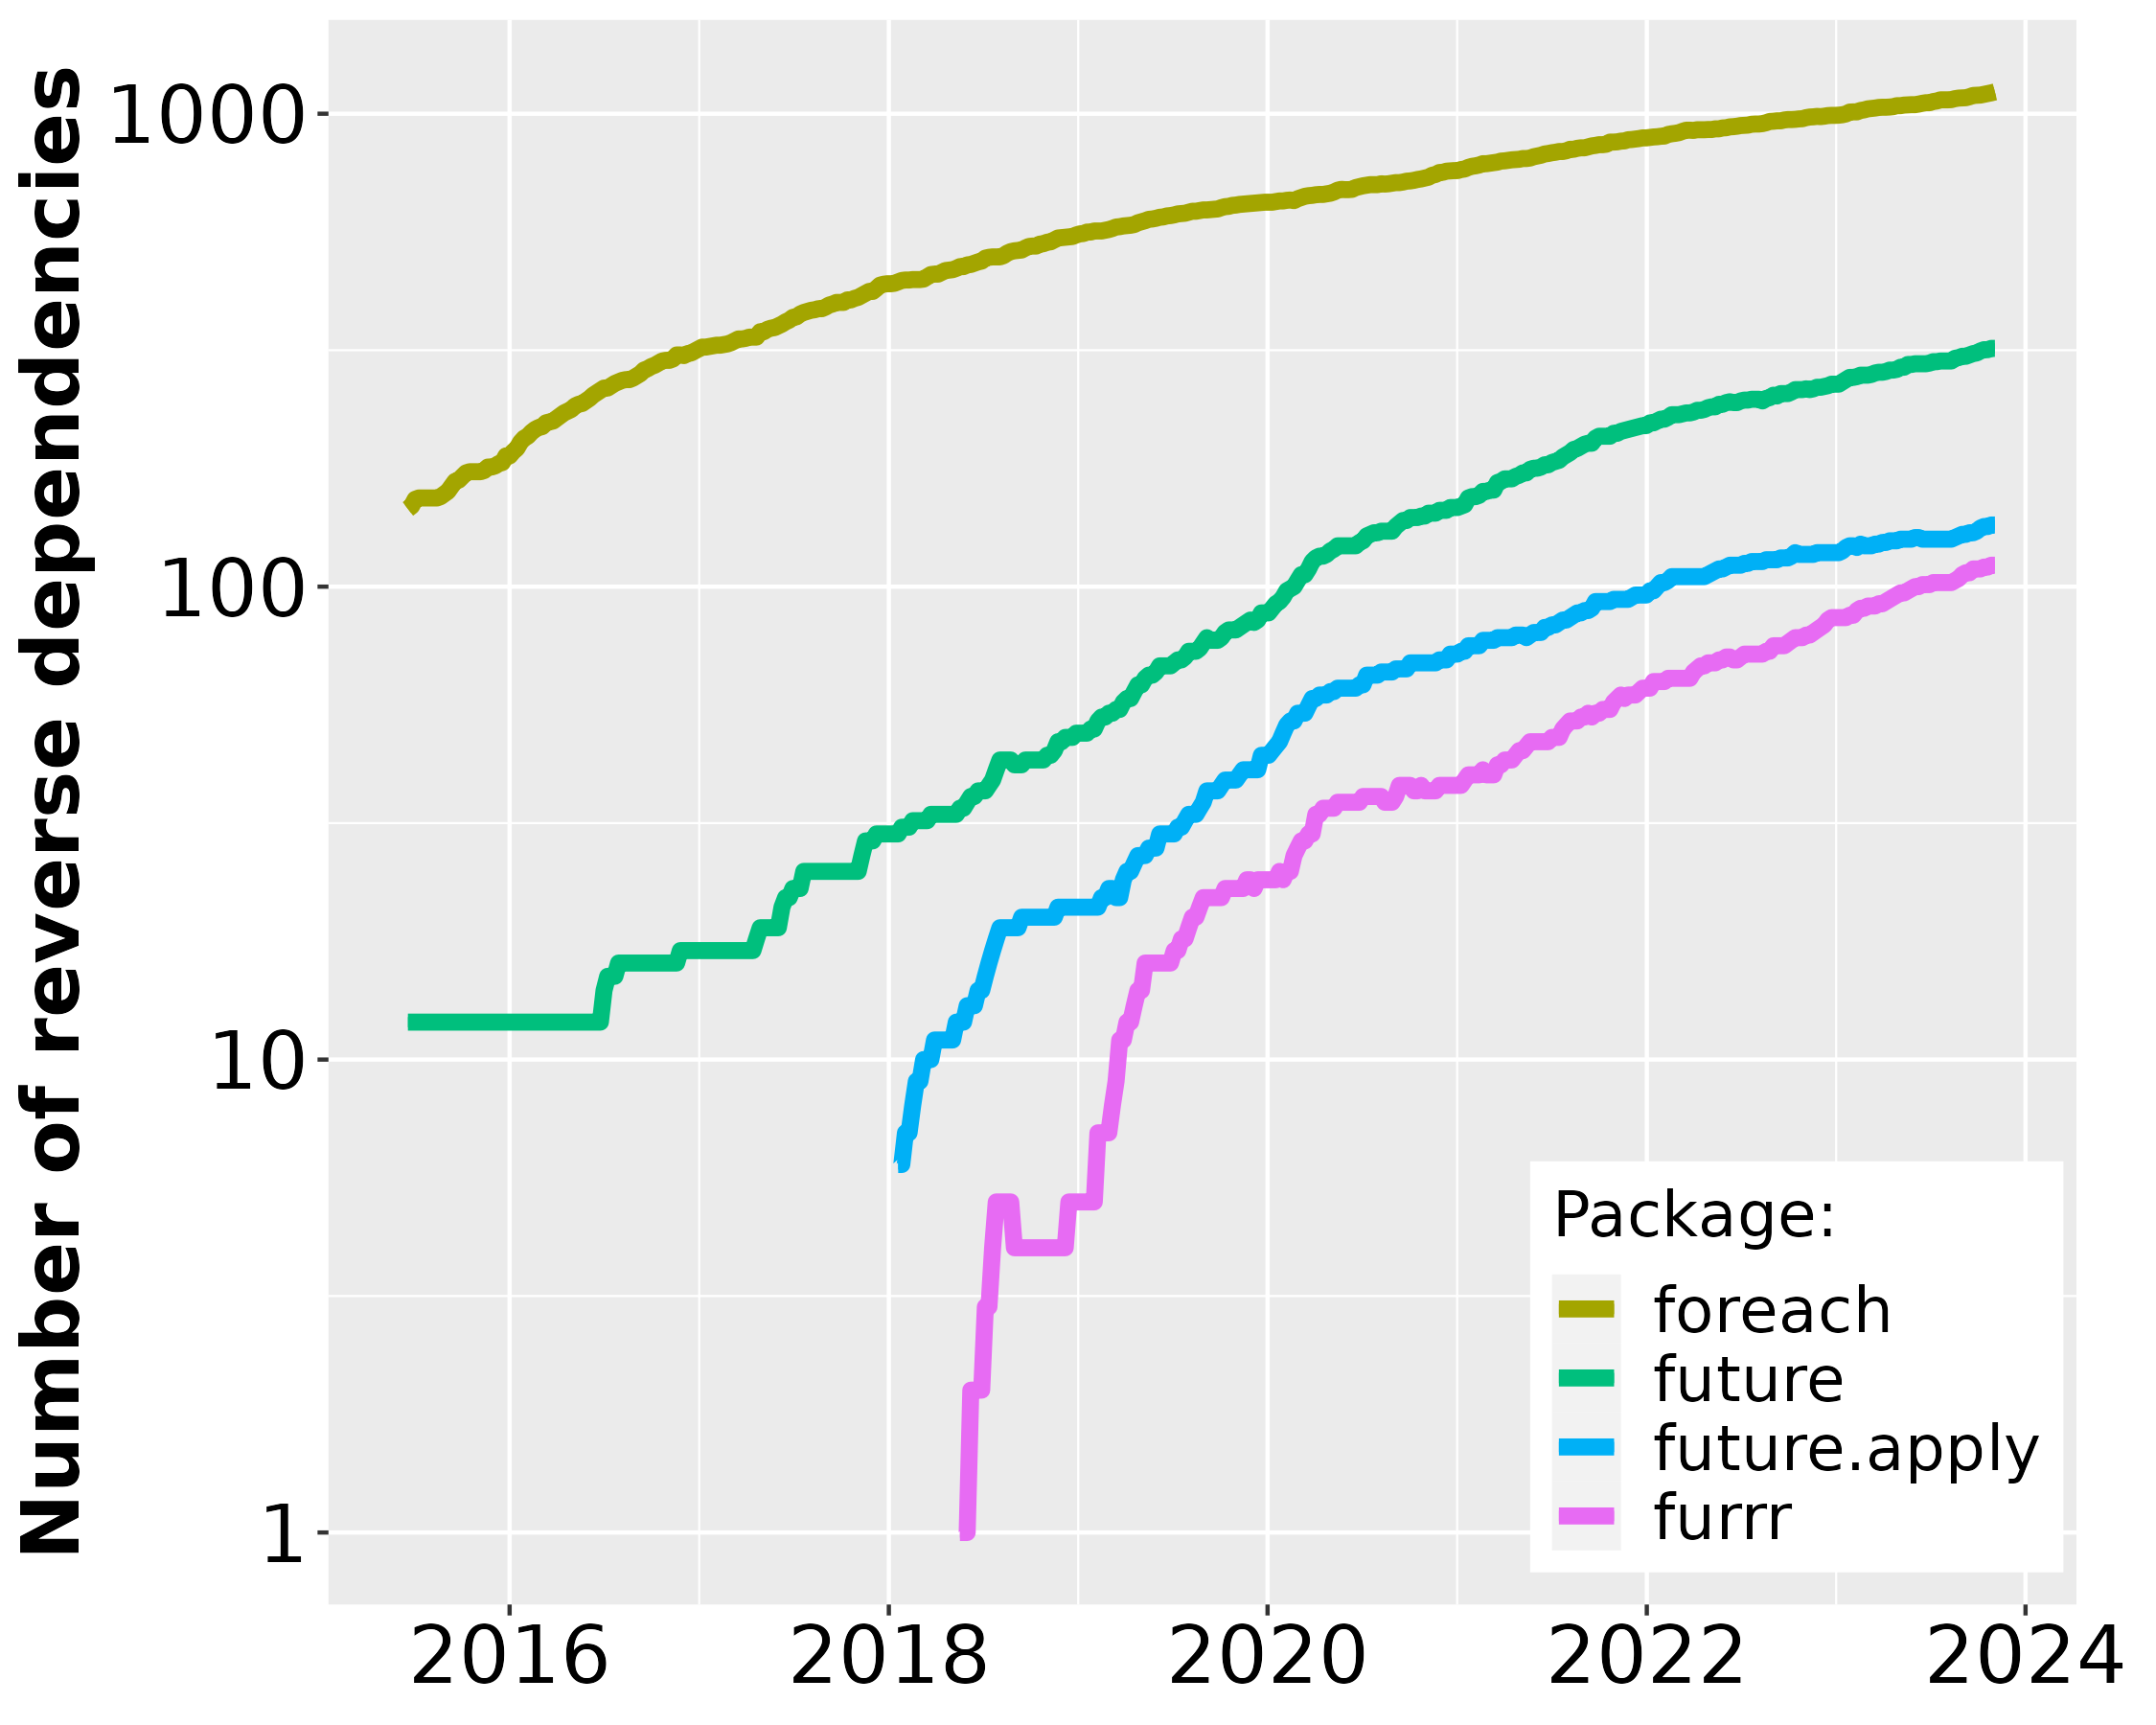 A line graph with 2015-2023 on the horizontal axis and 'Number of reverse dependencies' on the vertical axis, which is on the logarithmic scale. Curves for four packages, 'foreach', 'future', 'future.apply', and 'furrr', are shown, where foreach has more dependencies but with a lower slope than the others during recent years.